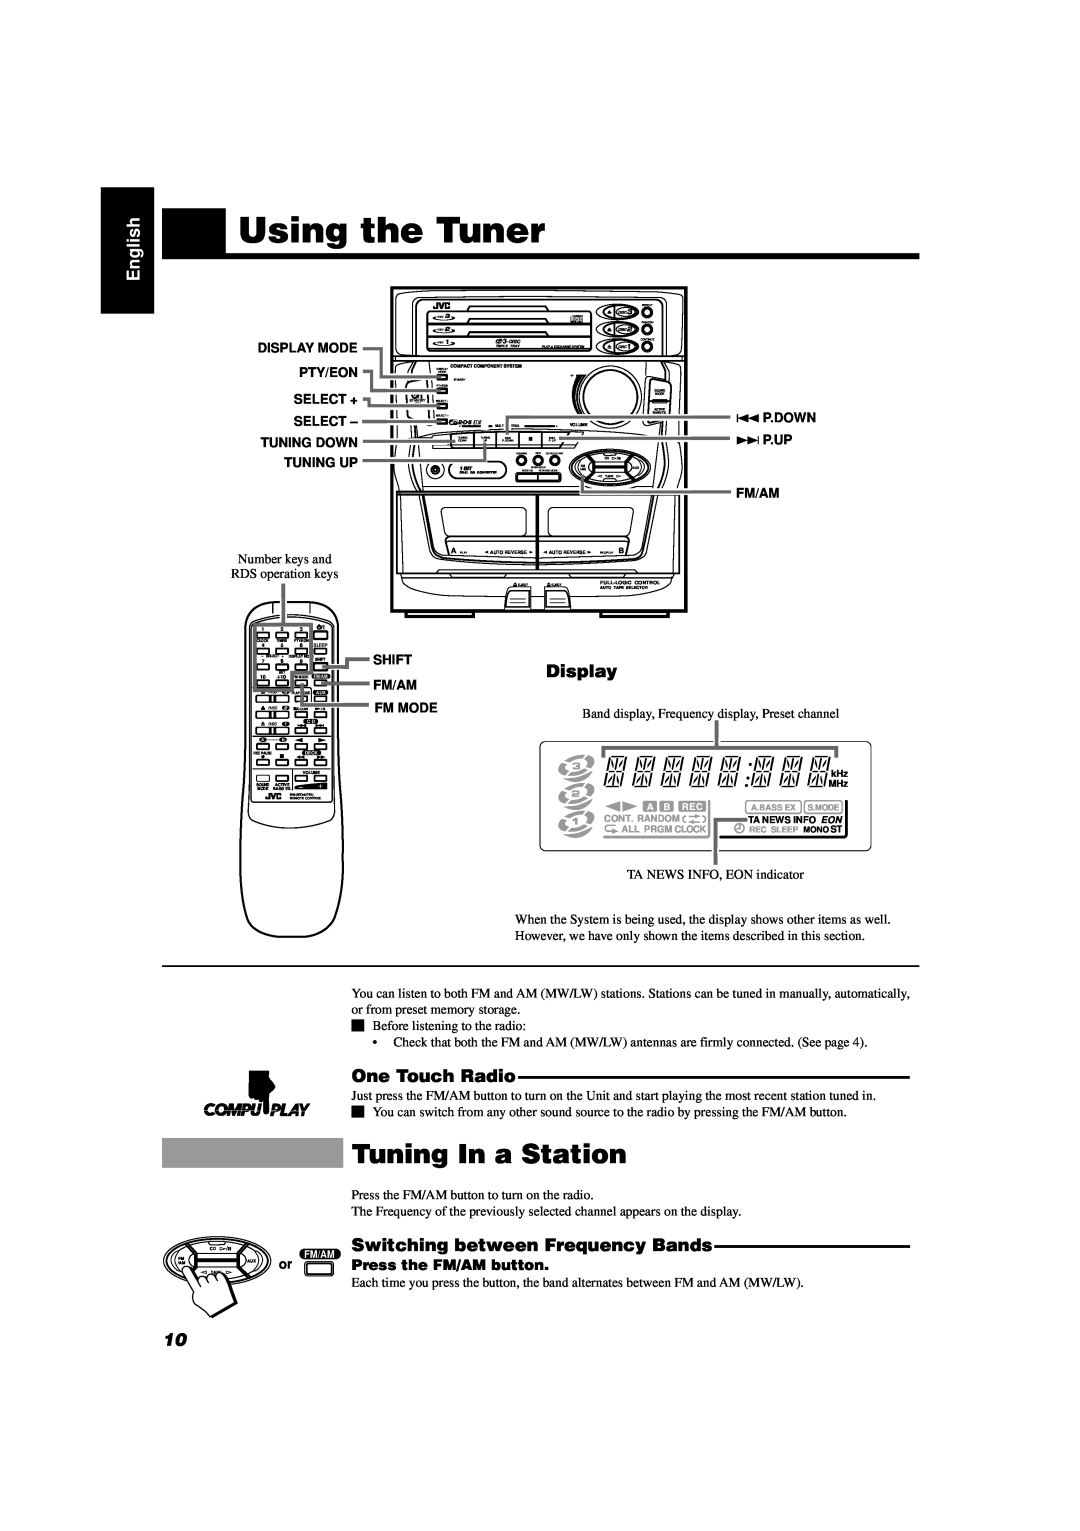 JVC CA-D451TR Using the Tuner, Tuning In a Station, One Touch Radio, Switching between Frequency Bands, English, Display 